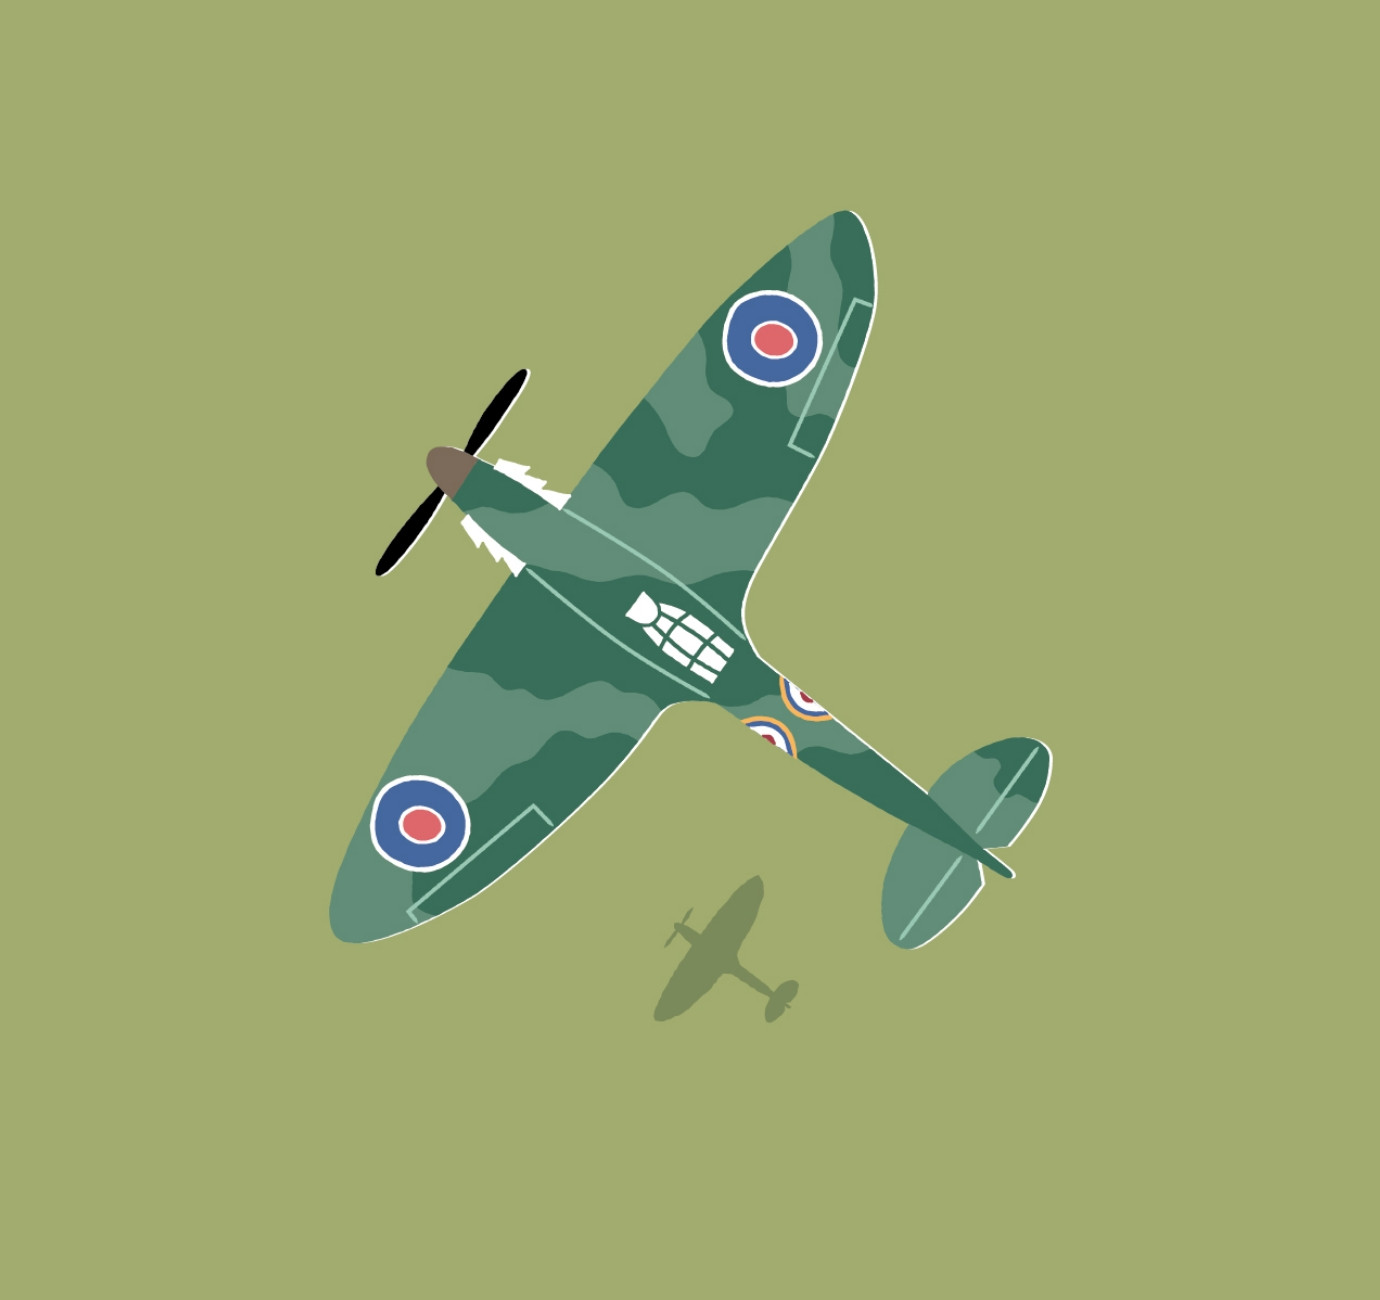 Duxford Air Show illustrated map design by Root Studio